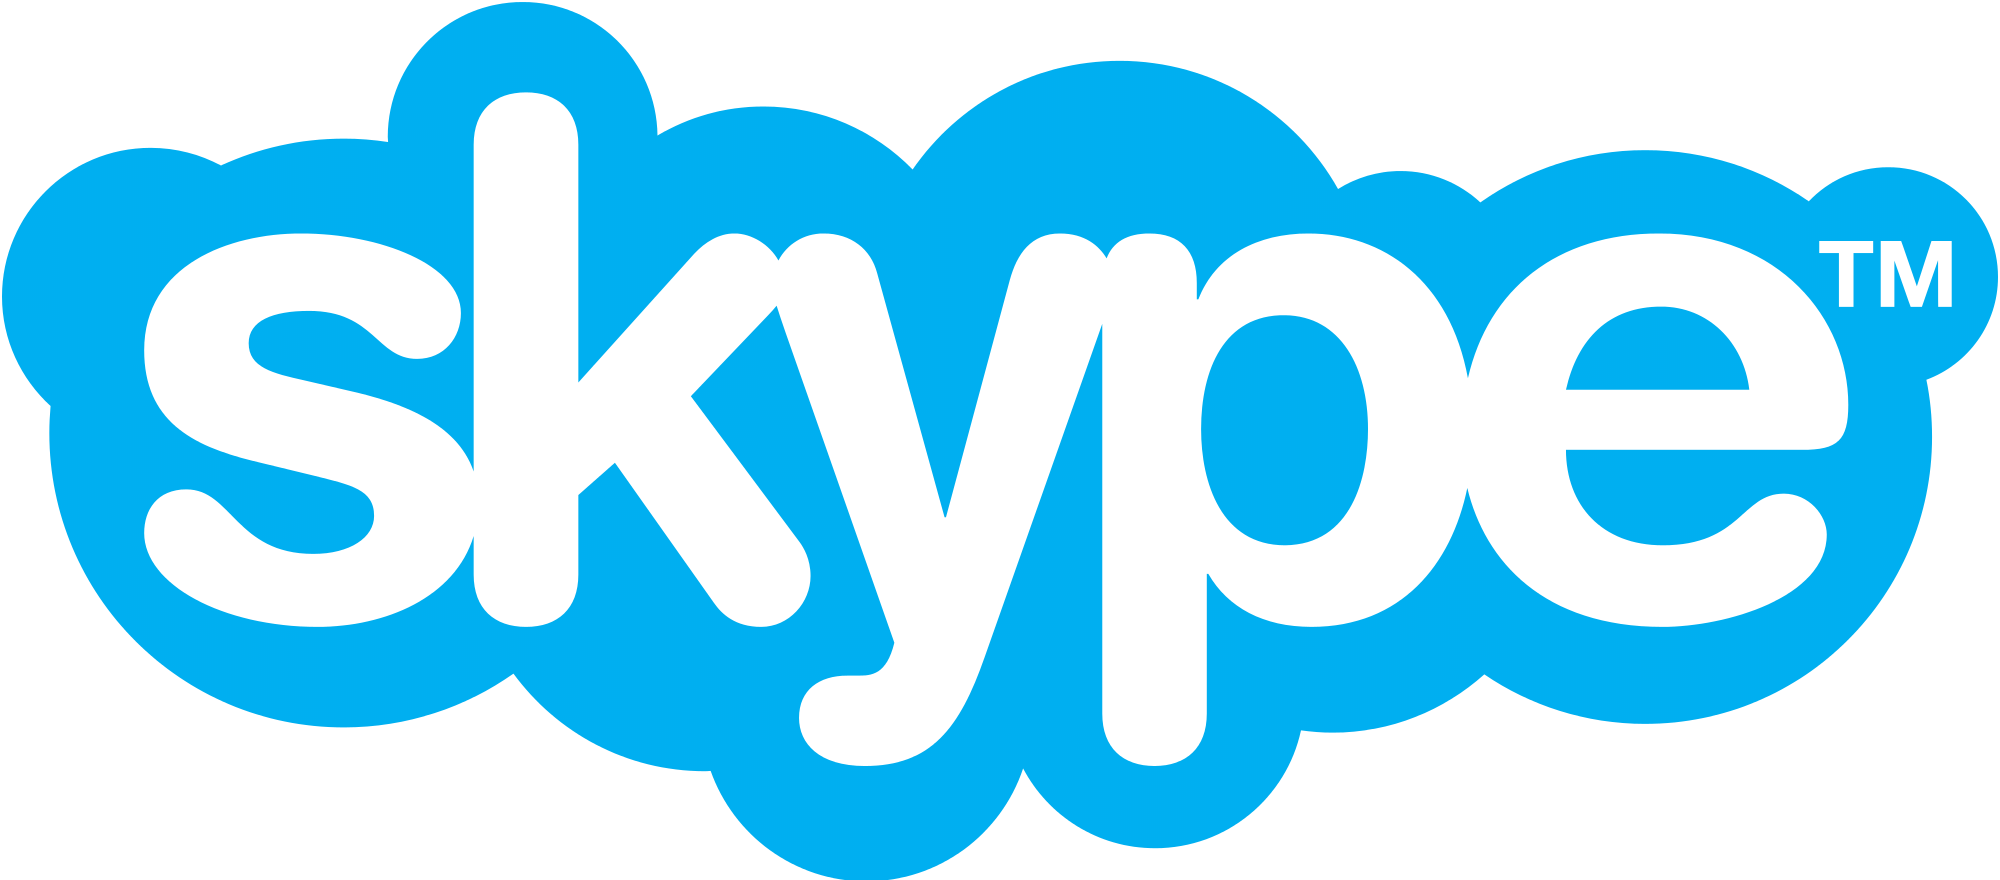 Skype Video Counselling for LGBT